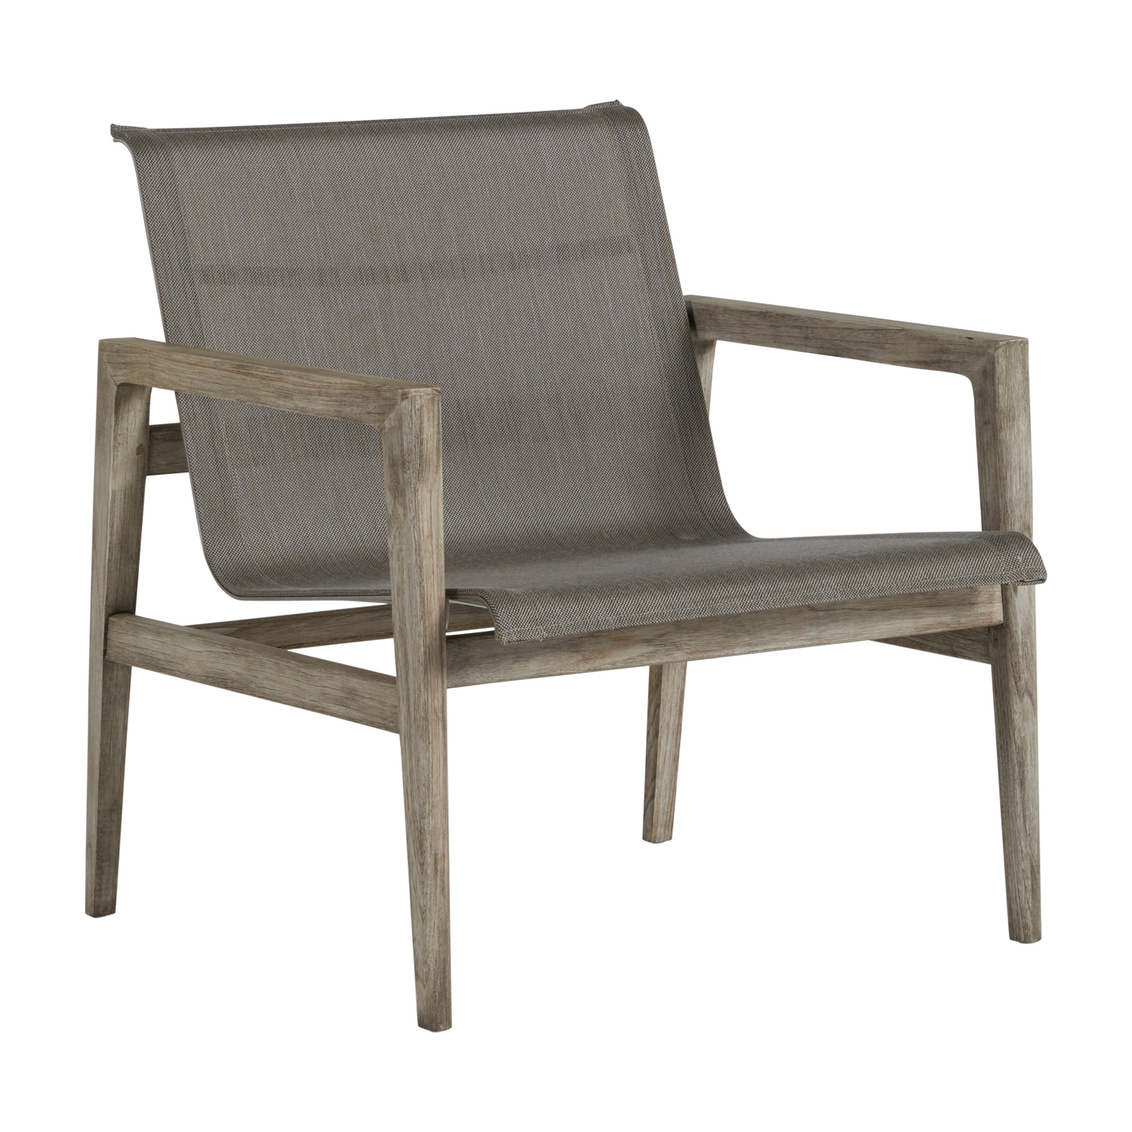 coast teak lounge chair in oyster teak / heather grey sling product image